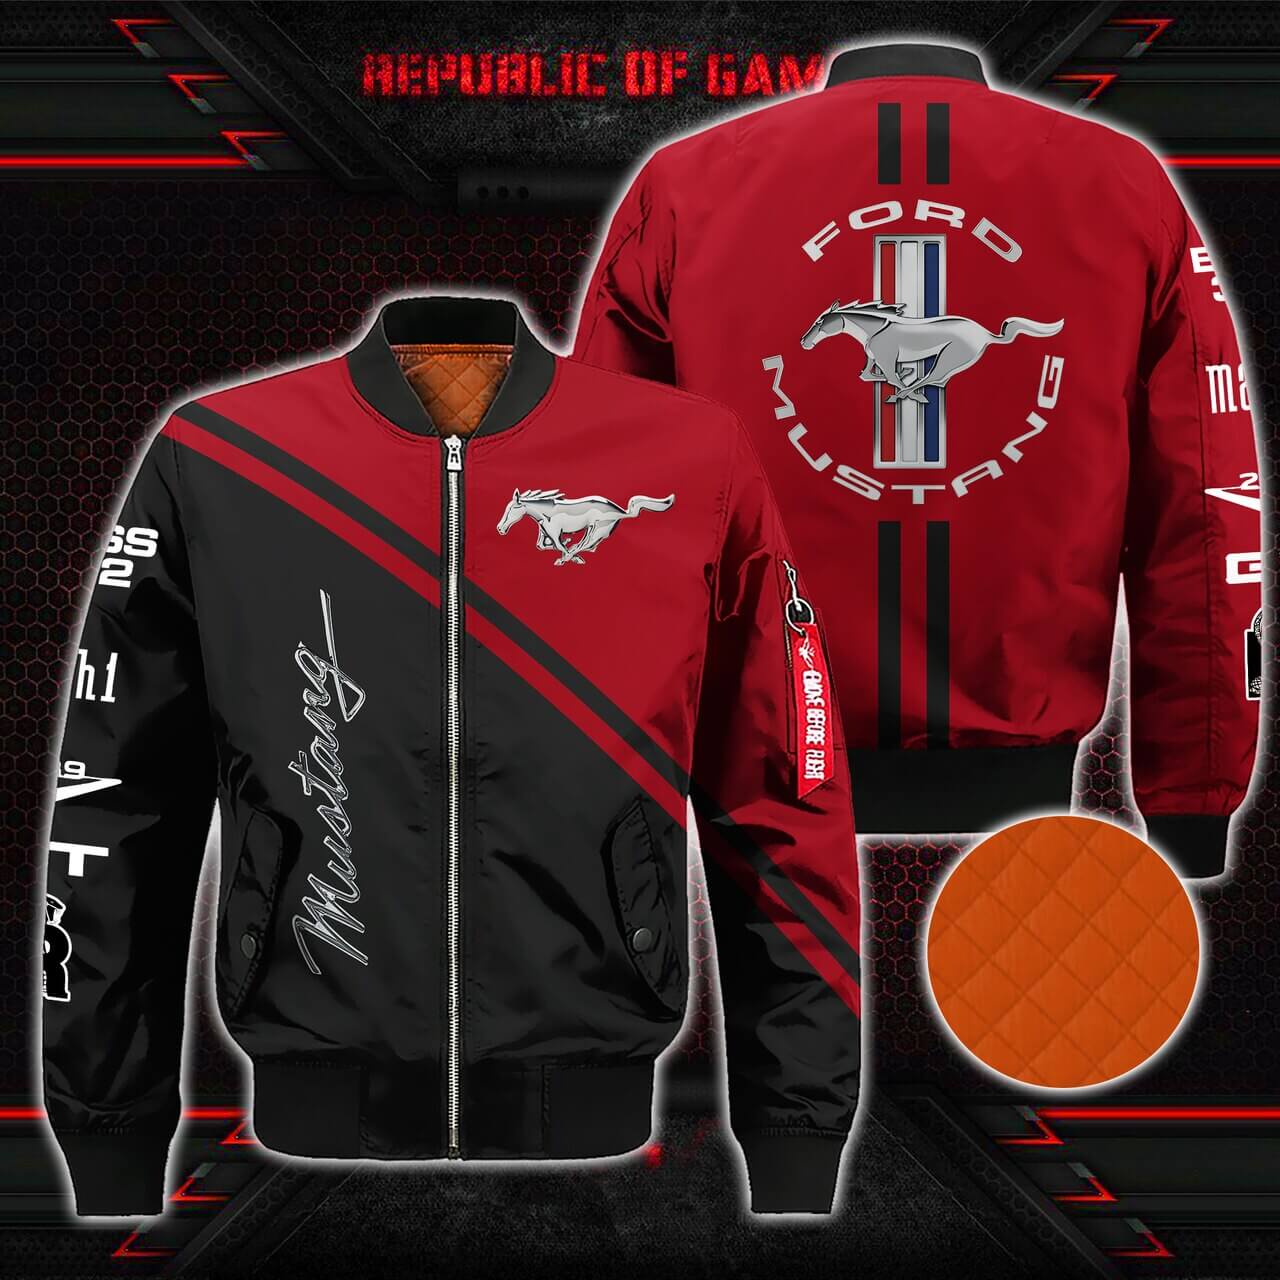 - JACKET OQ19 FOR - CARS SPORTS MUSTANG BOMBER MYFORDUS BOMBER MUSTANG AMERICAN - LOVER SPECIAL CLOTHING - GIFT JACKET BOMBER - FORD BOMBER MUSCLE - JACKET - BRANDED JACKET UNIQUE